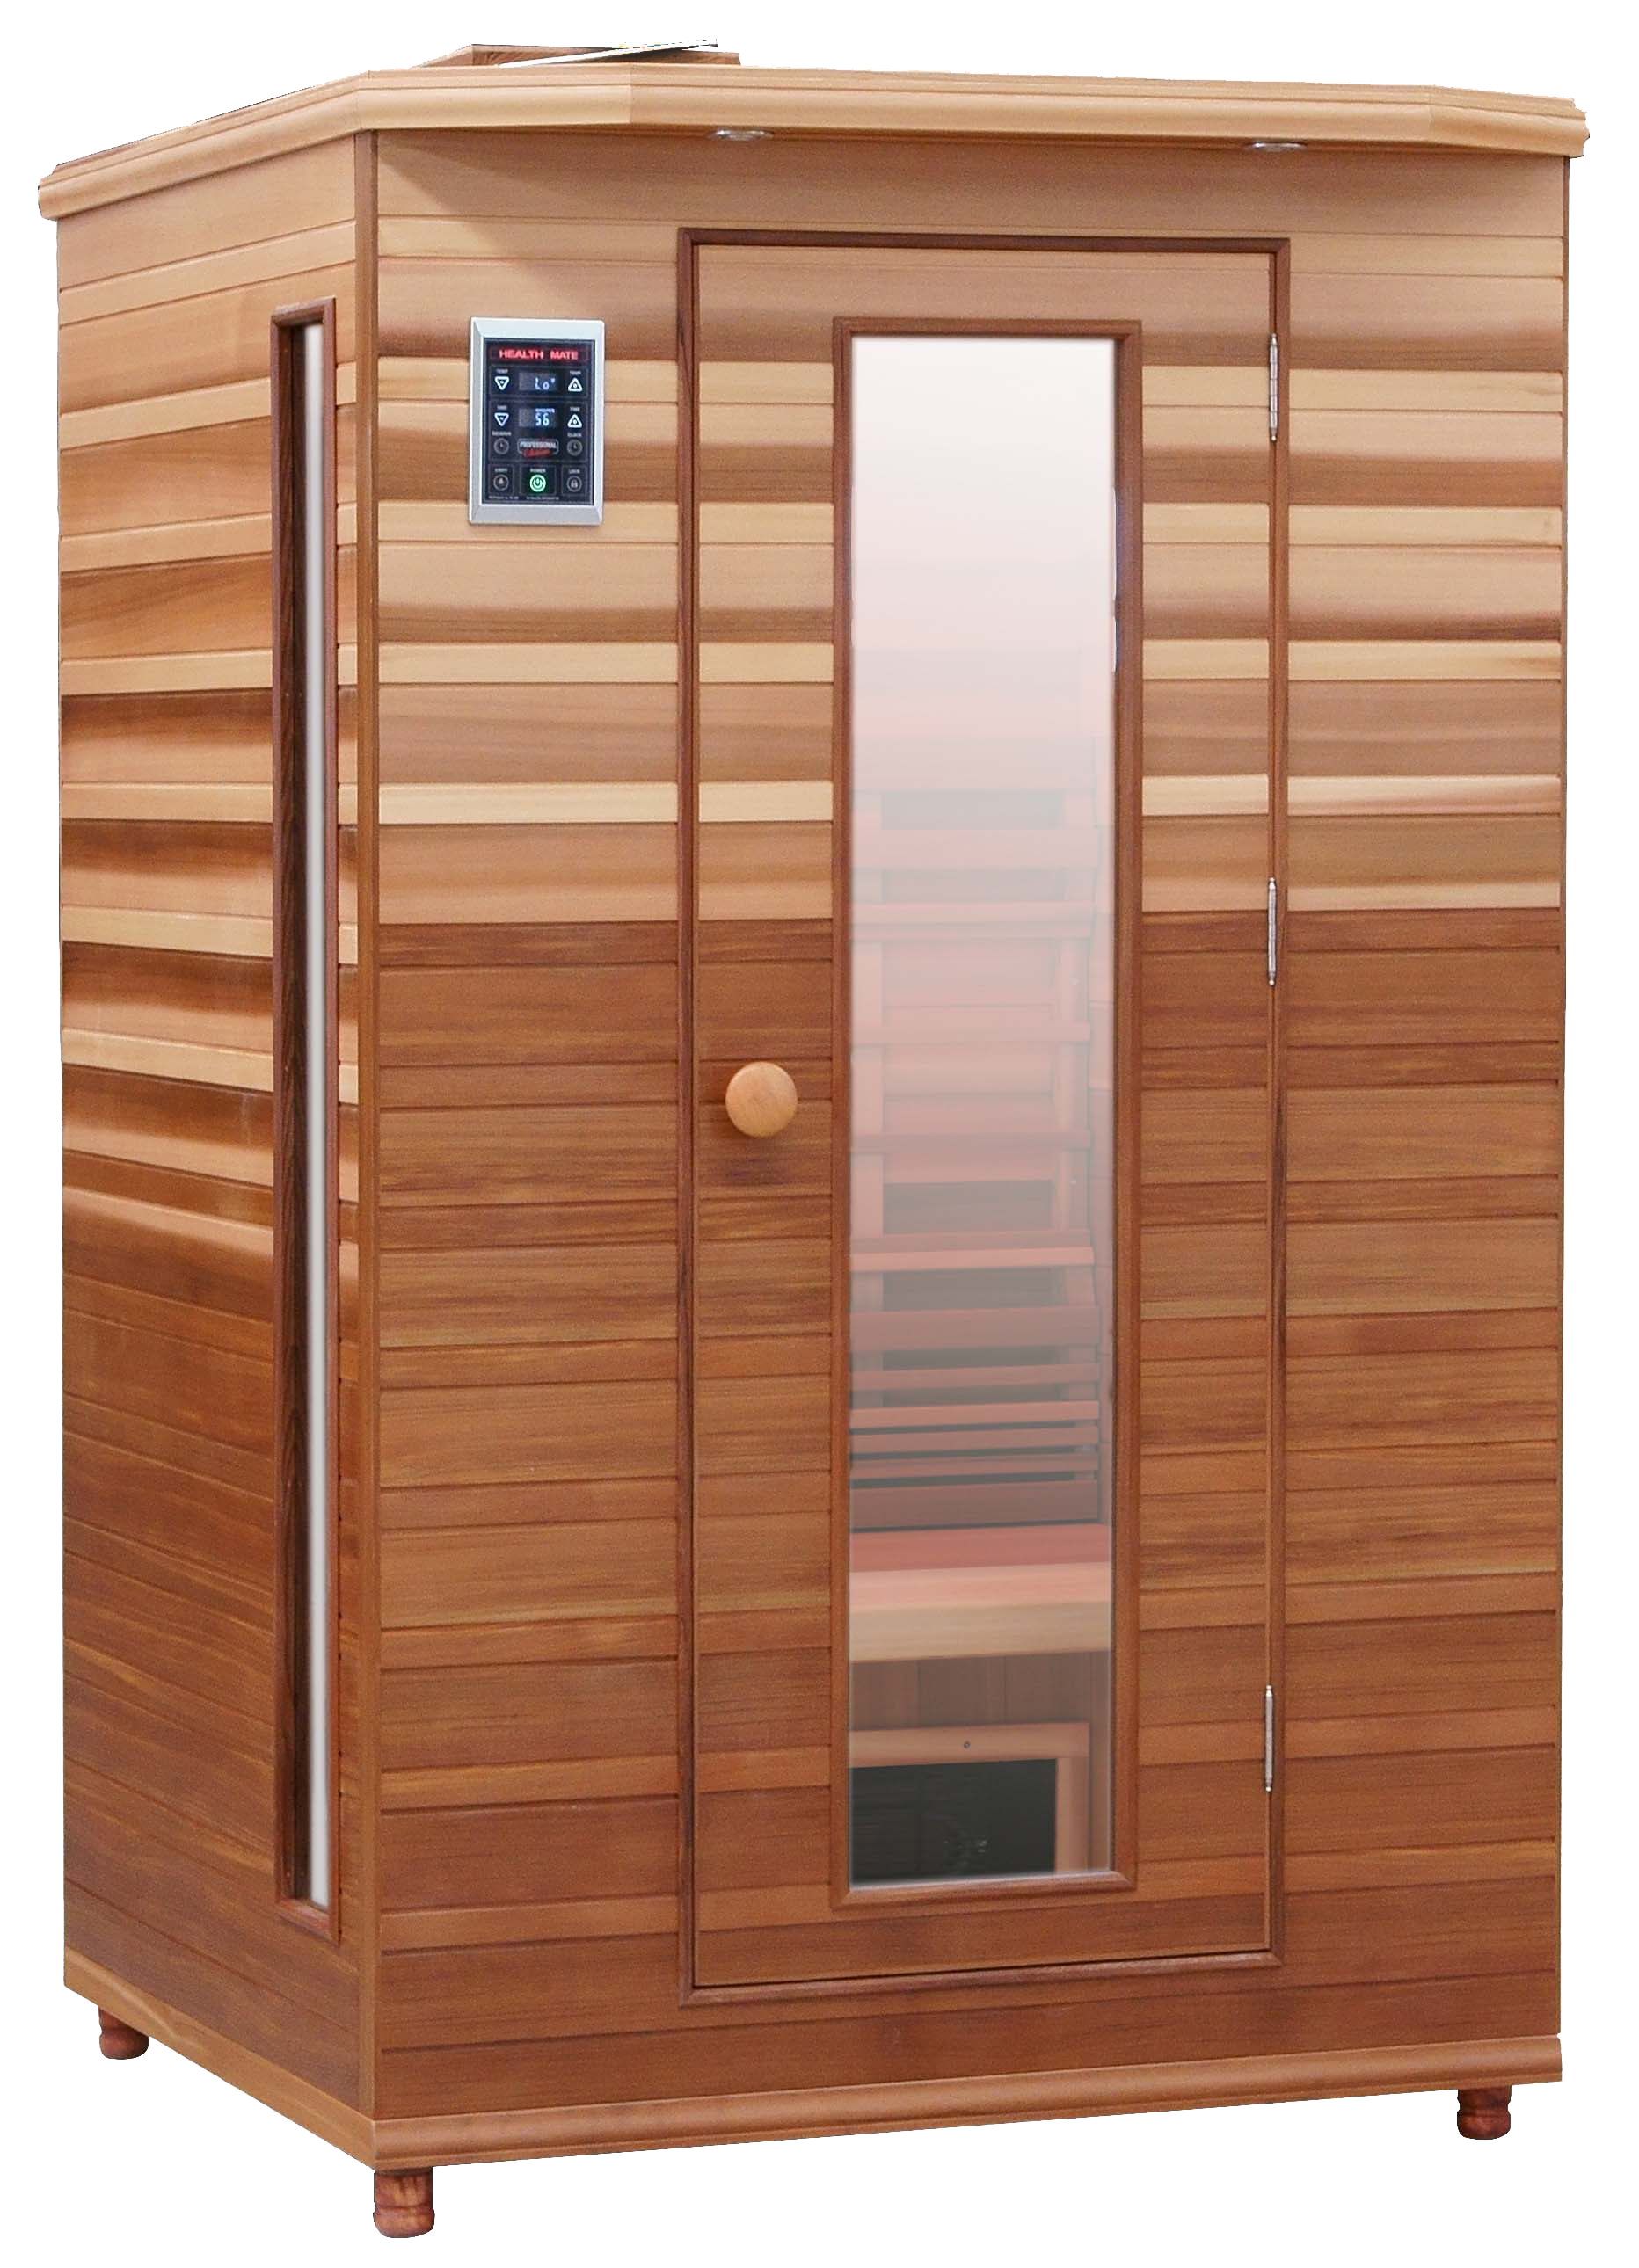 Try Before You Buy - FREE Sauna Session